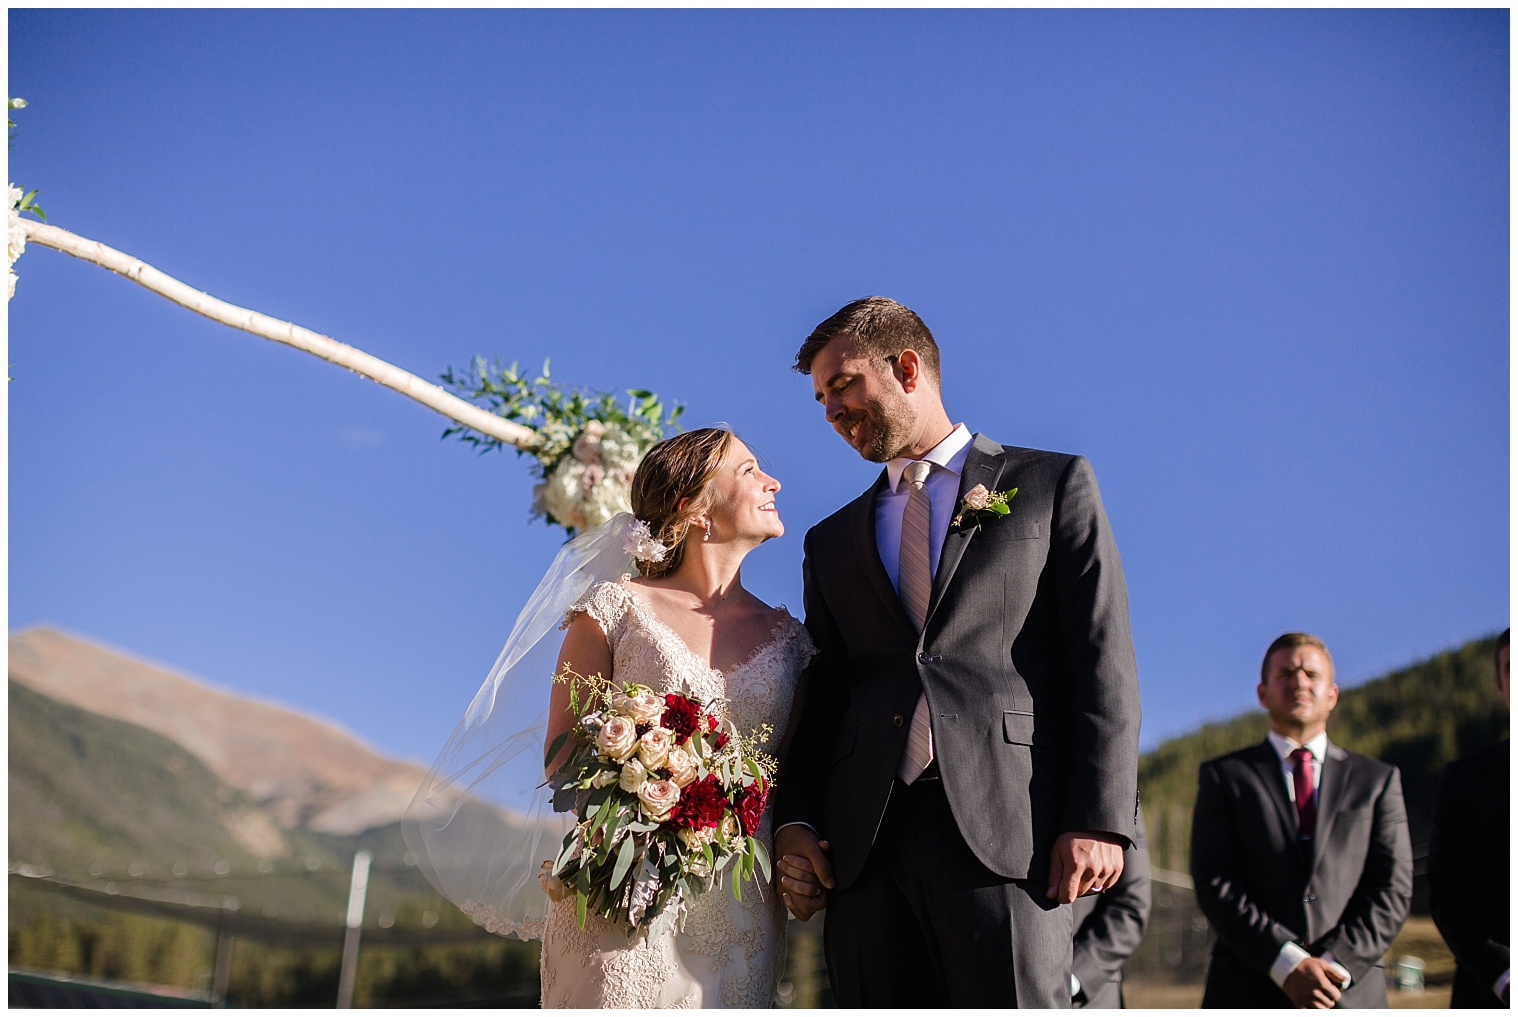 During their Copper Mountain wedding ceremony, the bride and groom hold hands and smile at each other.